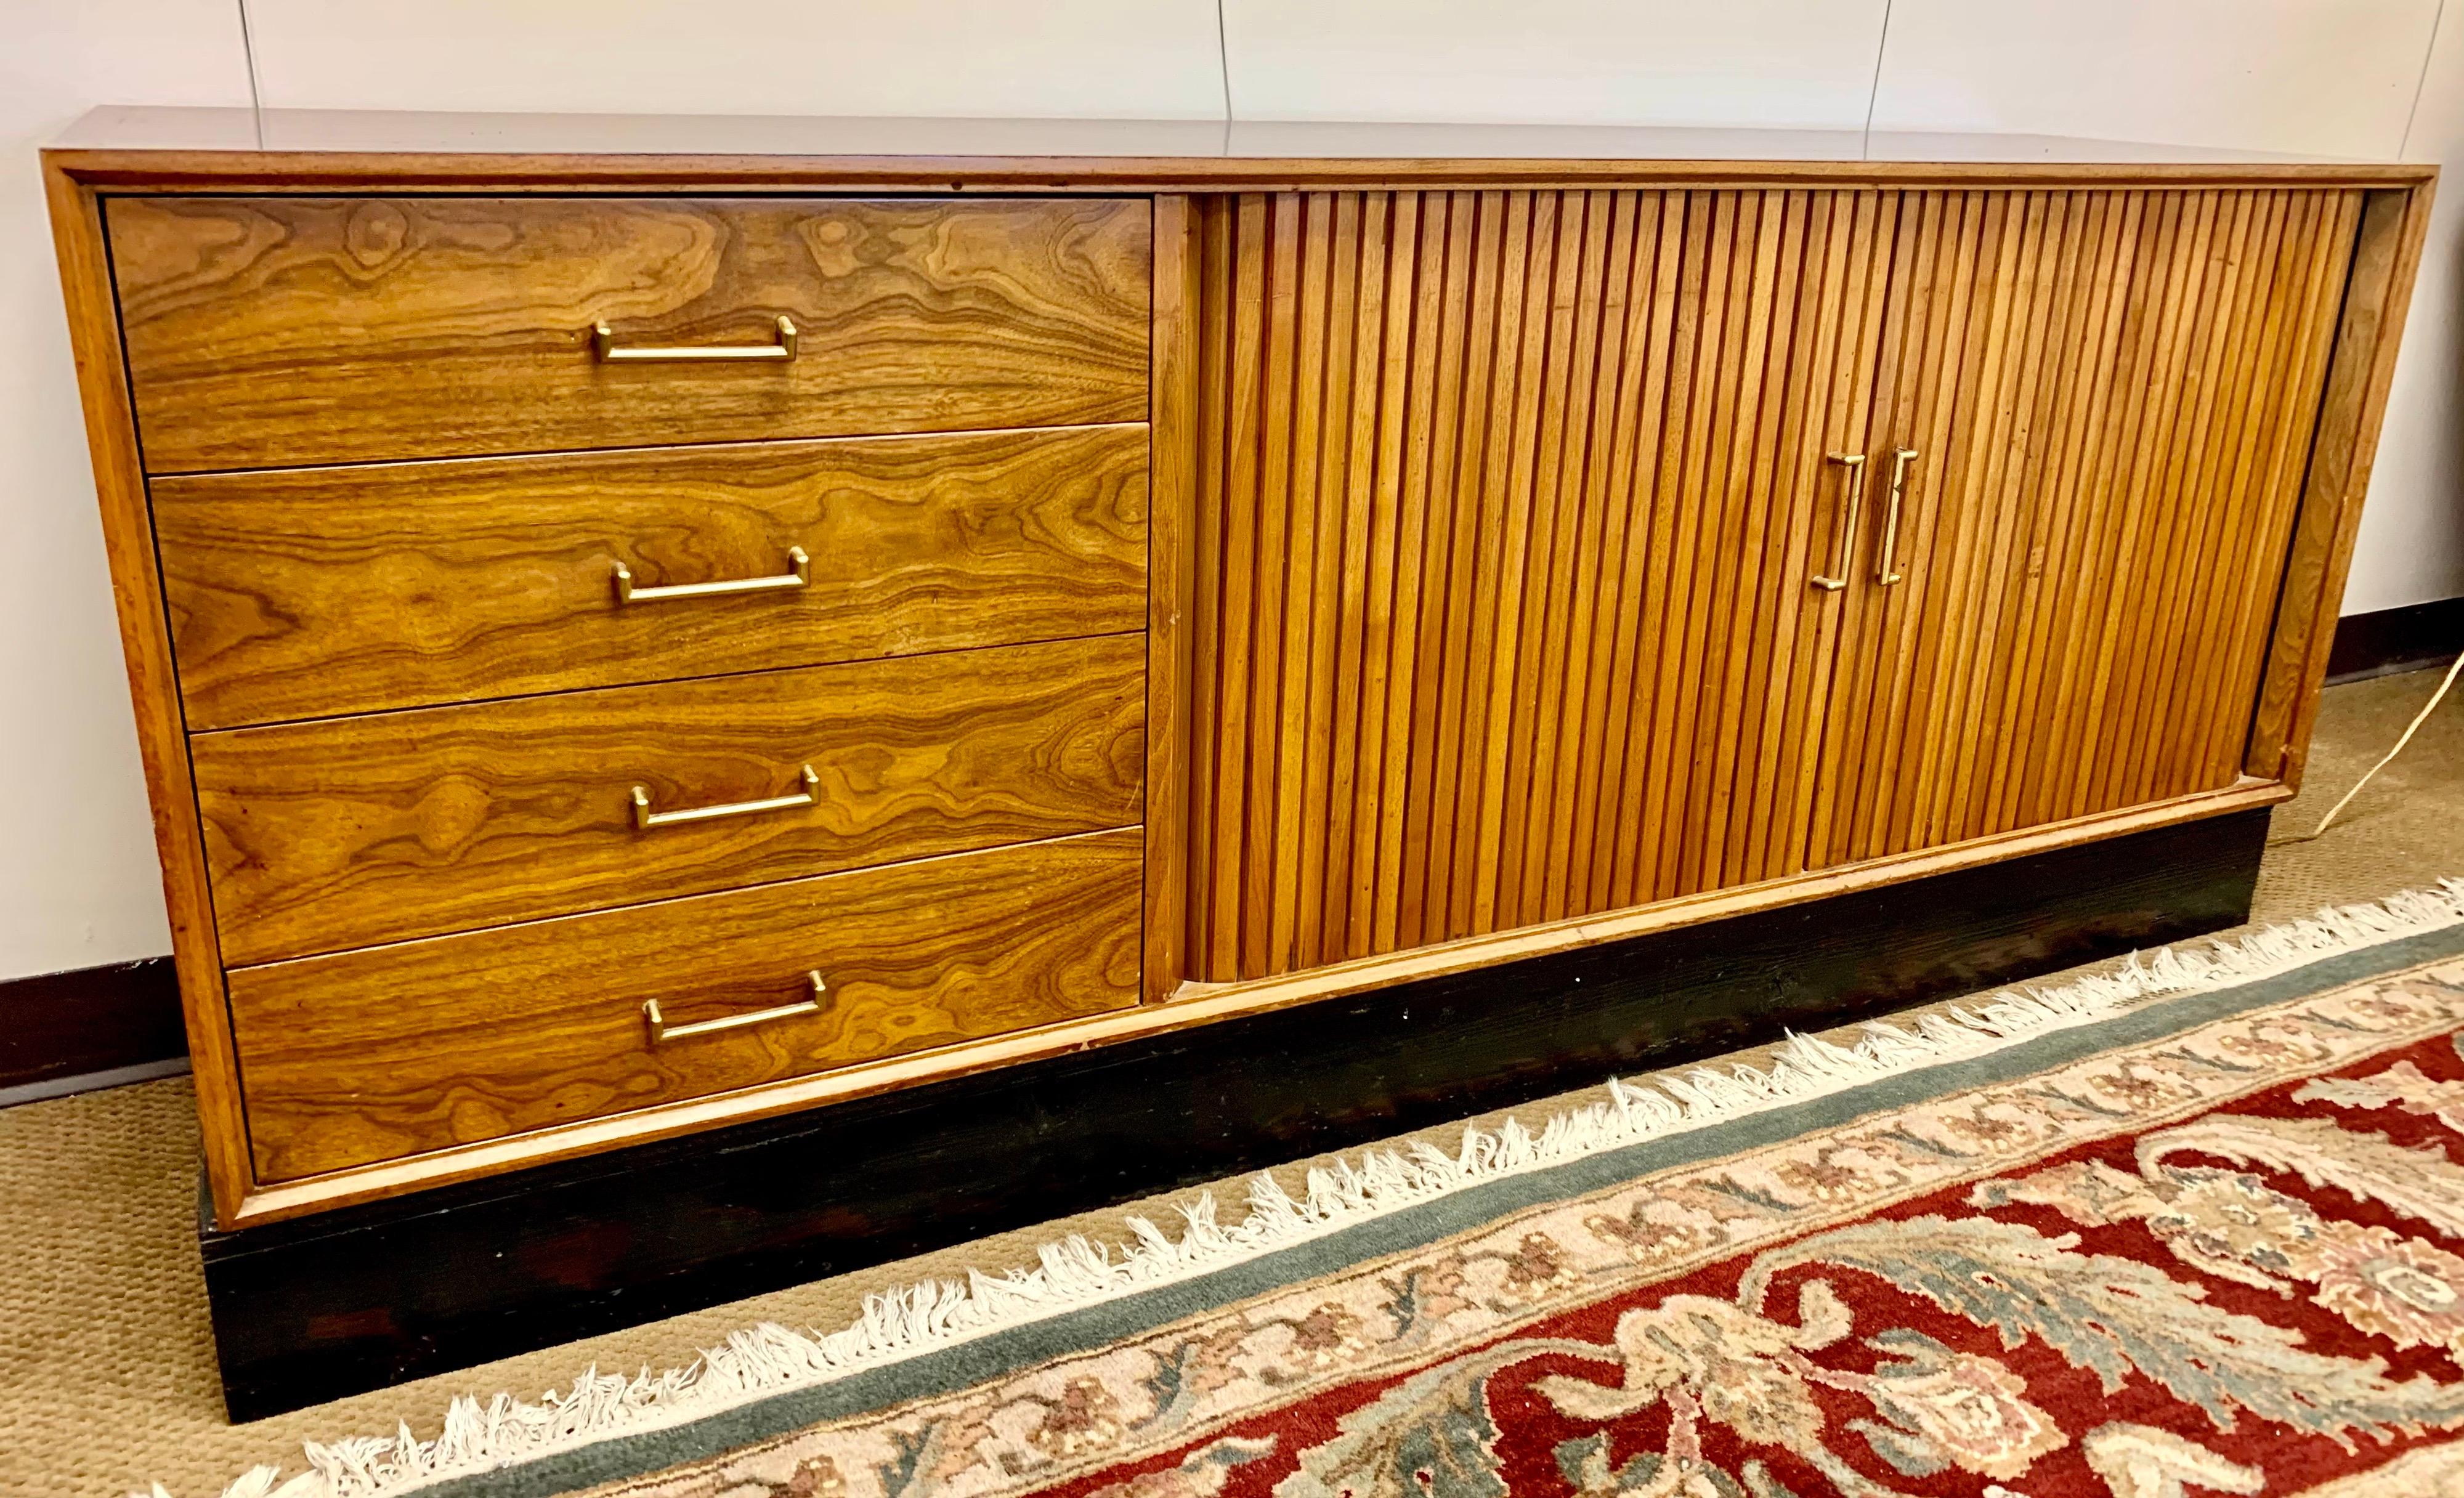 This versatile walnut mid-century credenza can be used as a sideboard, buffet, dresser or entertainment console. It has plenty of storage and features two tambour doors that open to shelves and four large drawers. It rests on a black wooden plinth.